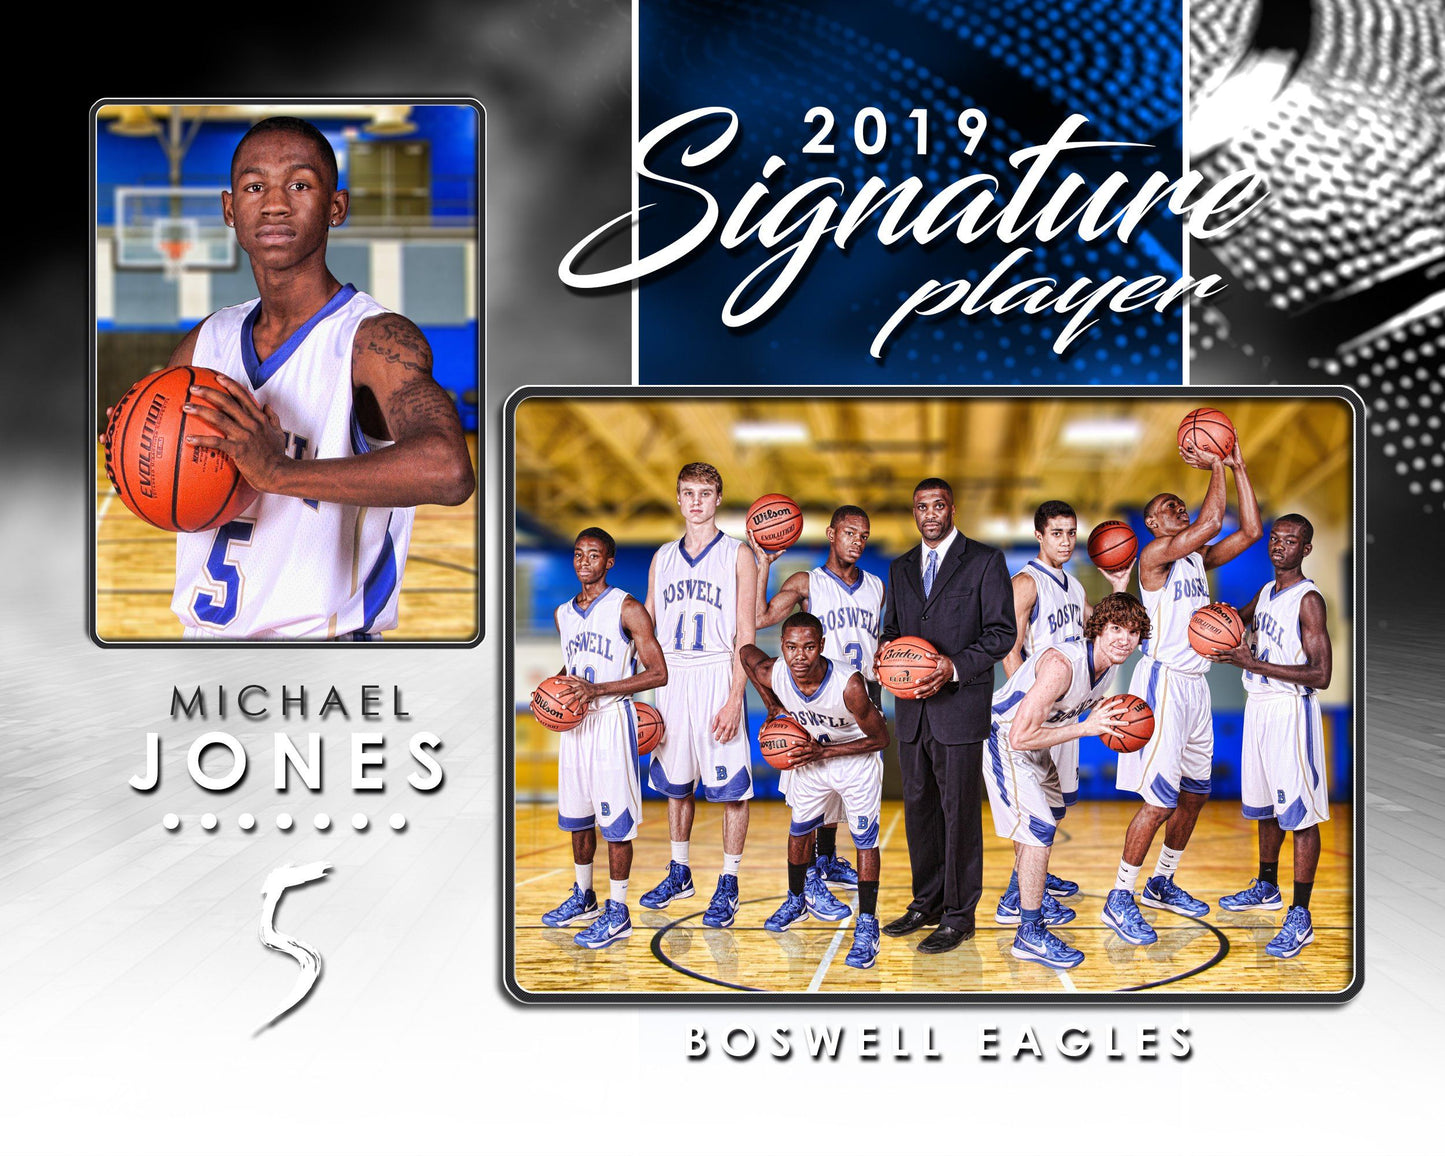 Signature Player - Basketball - V1 - Drop In Memory Mate H Template-Photoshop Template - Photo Solutions